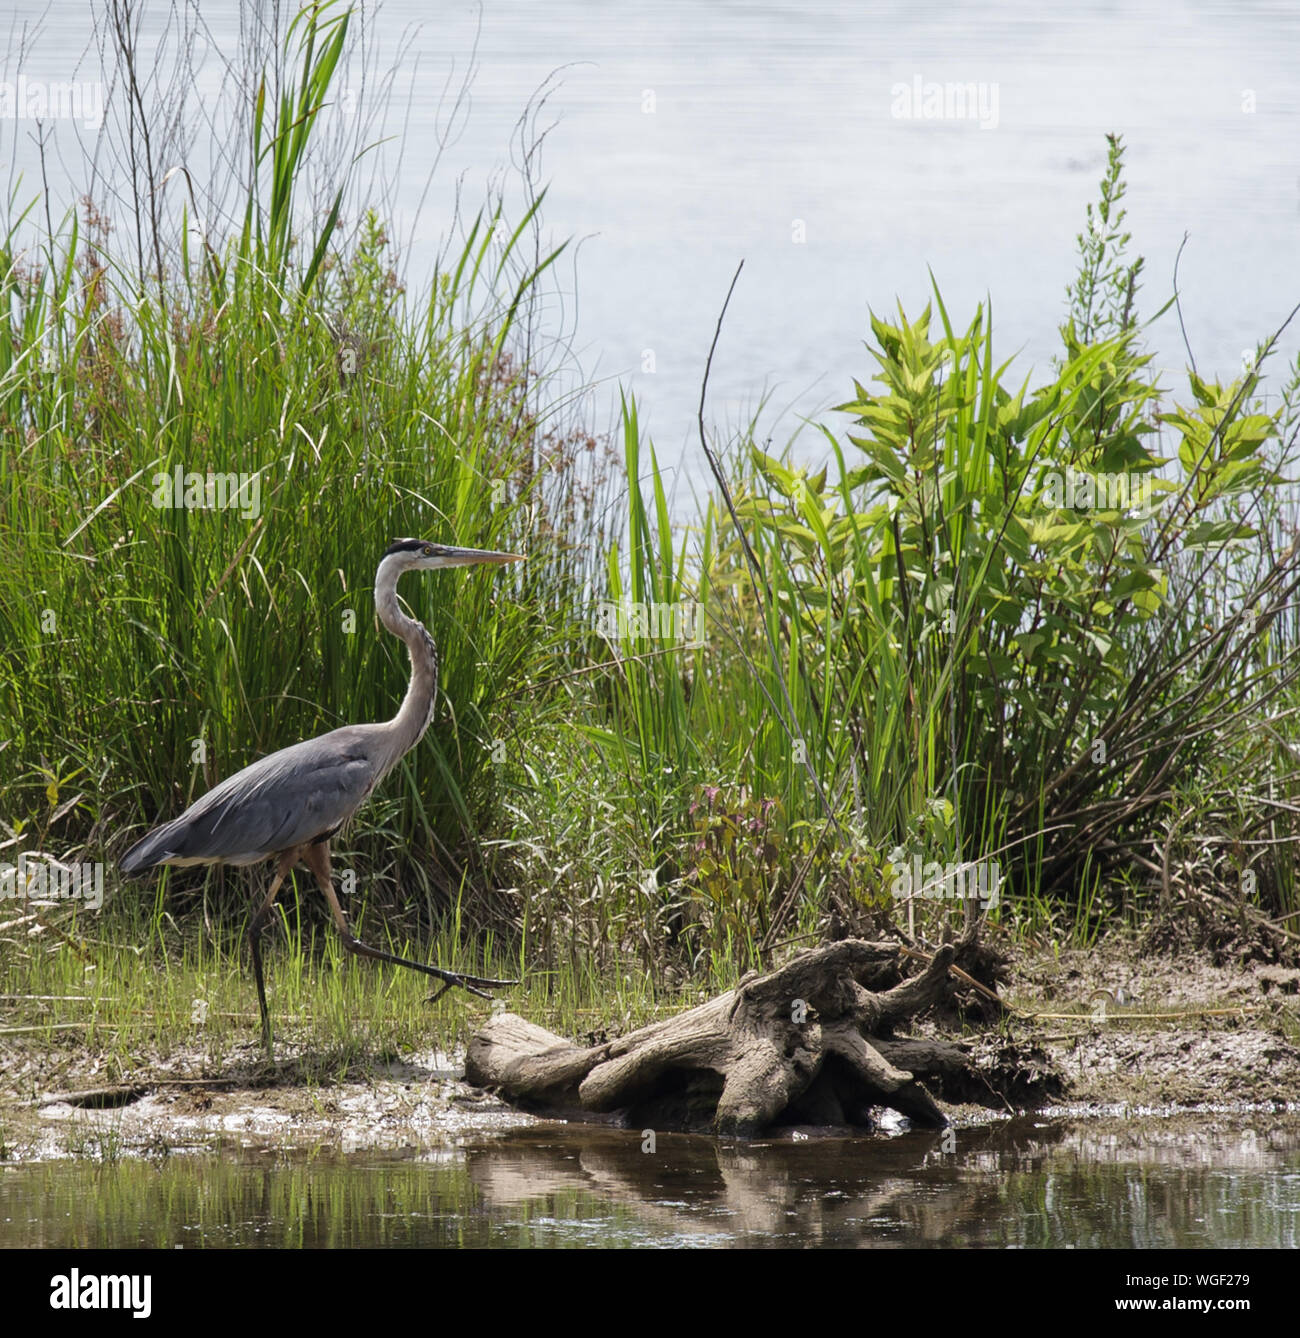 A Great blue heron walks along the shore of Running Water Creek as it enters the Tennessee River. Stock Photo